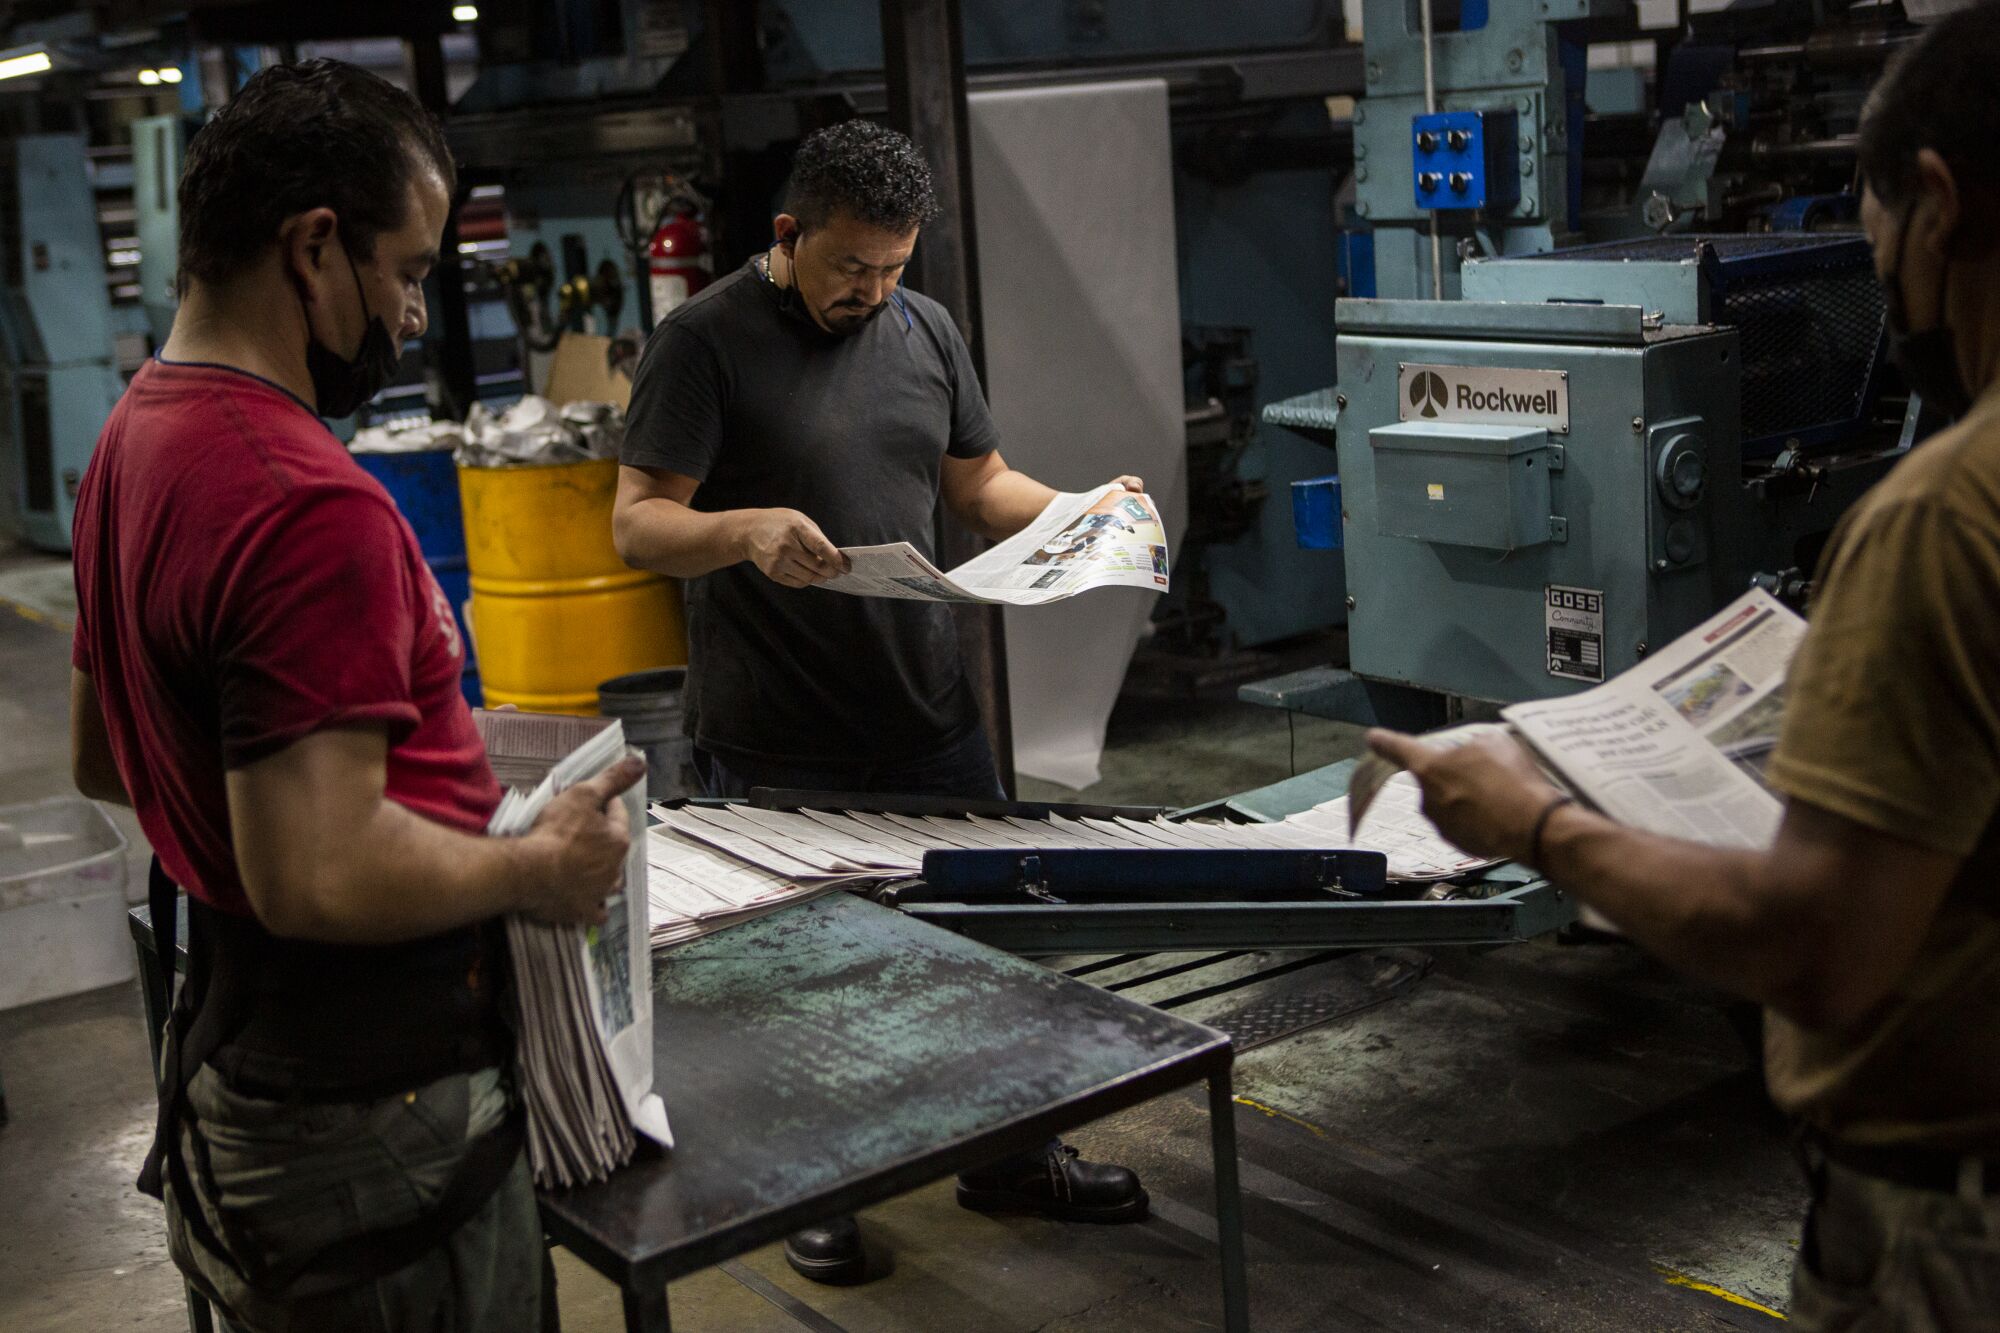 Workers at the el Periodico newspaper's printing press review last details before they are packed for distribution